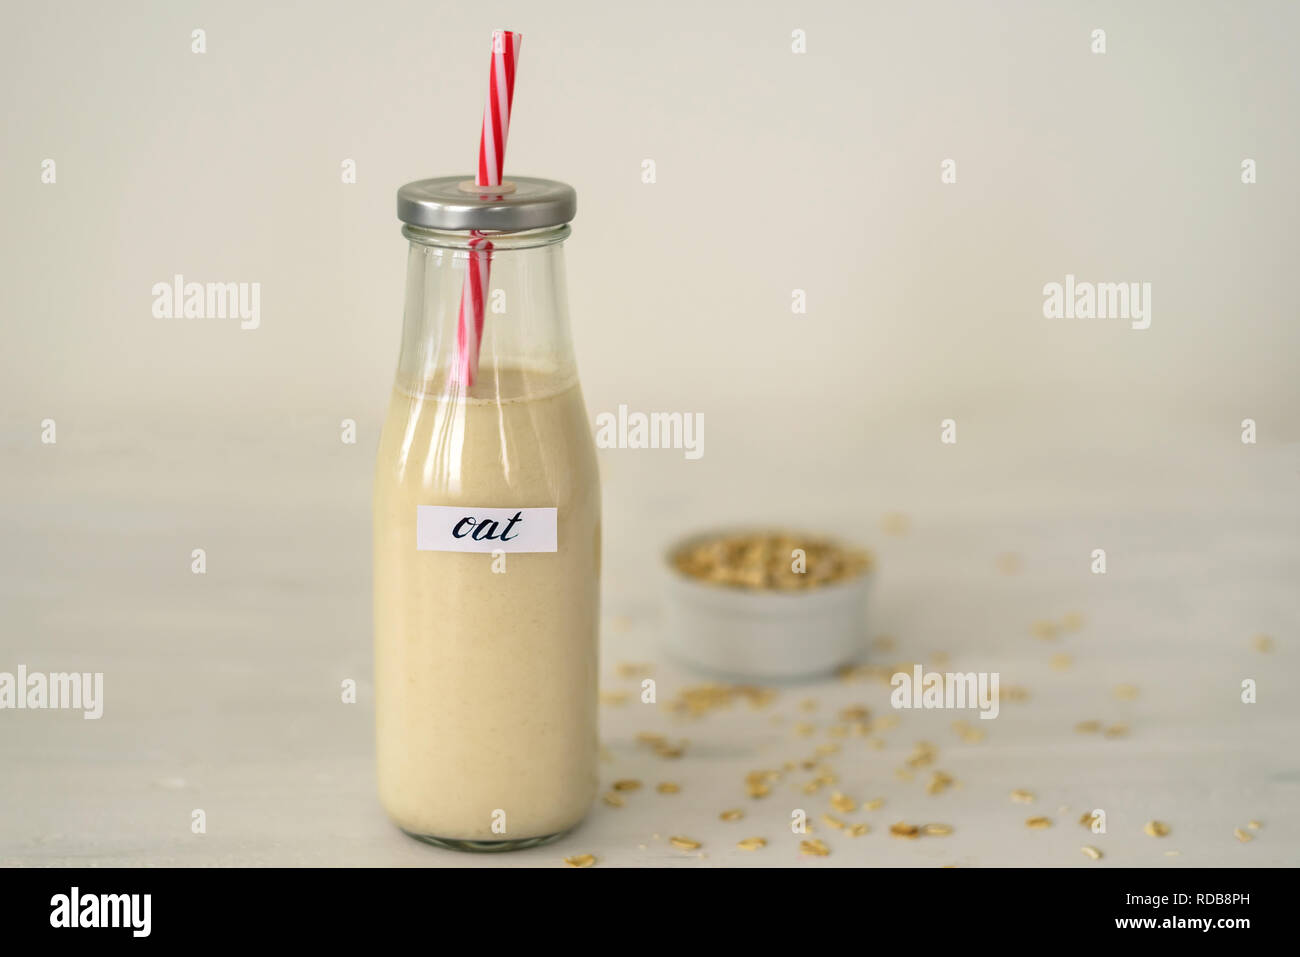 Glass bottle of oat milk on white background. Bowl with oatmeal flakes near it Stock Photo